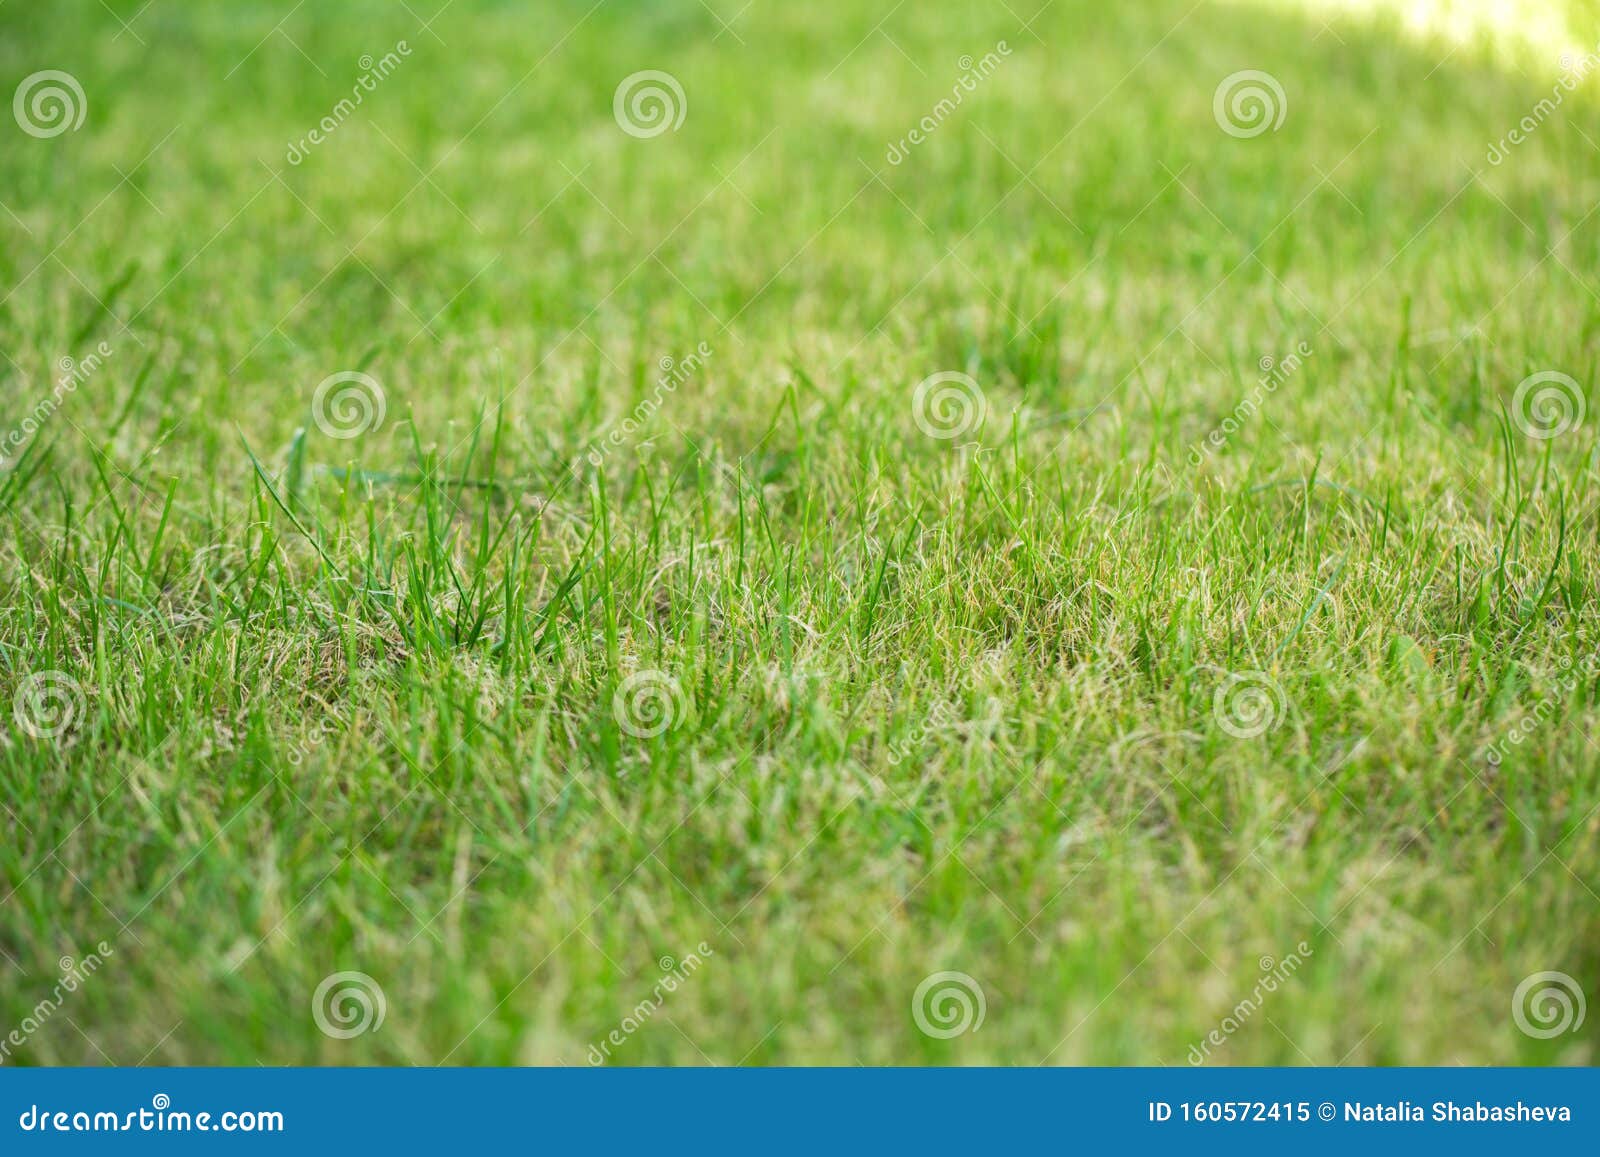 Green Grass, Lawn Mowed. Background Stock Image - Image of closeup